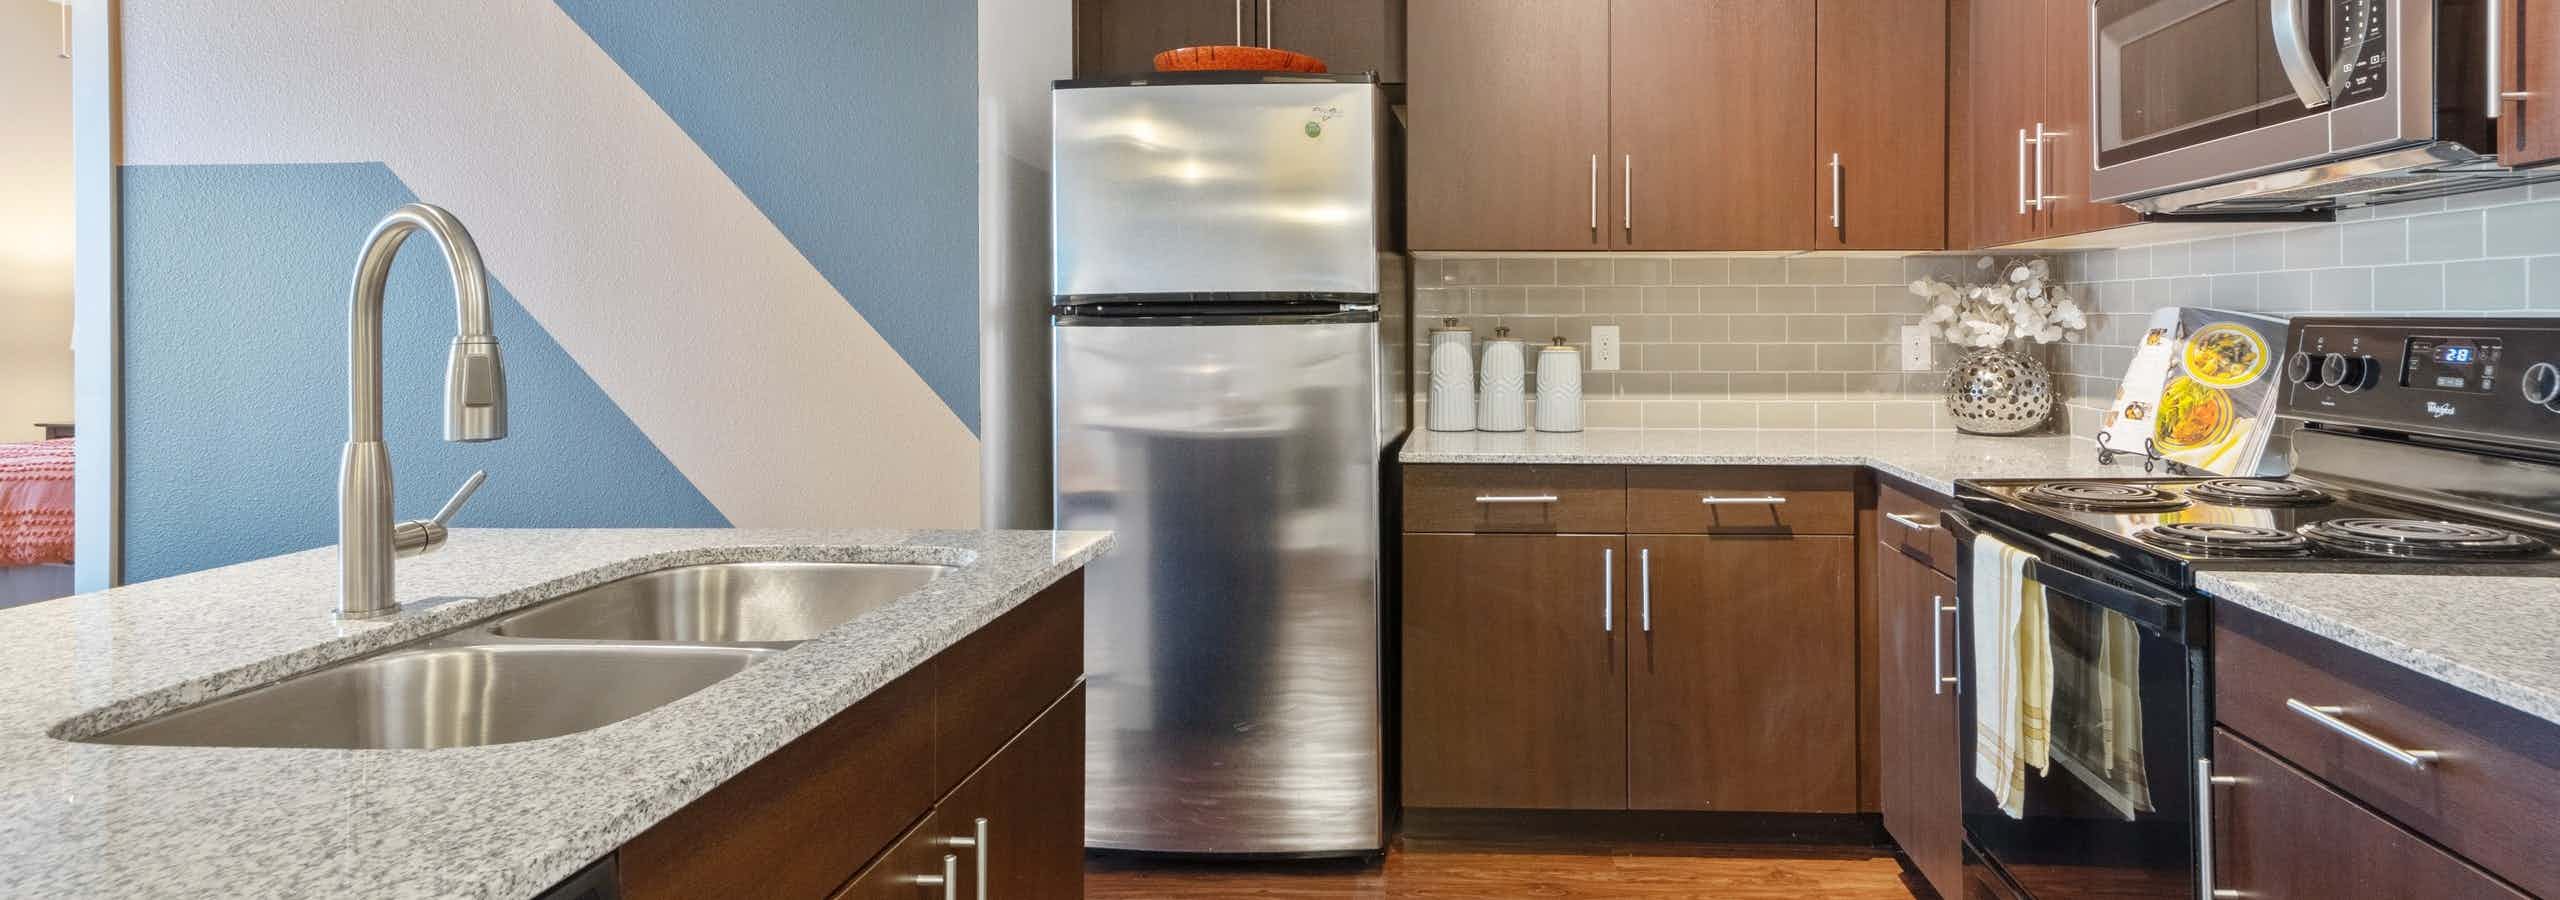 Fully-equipped kitchen with stainless steel refrigerator